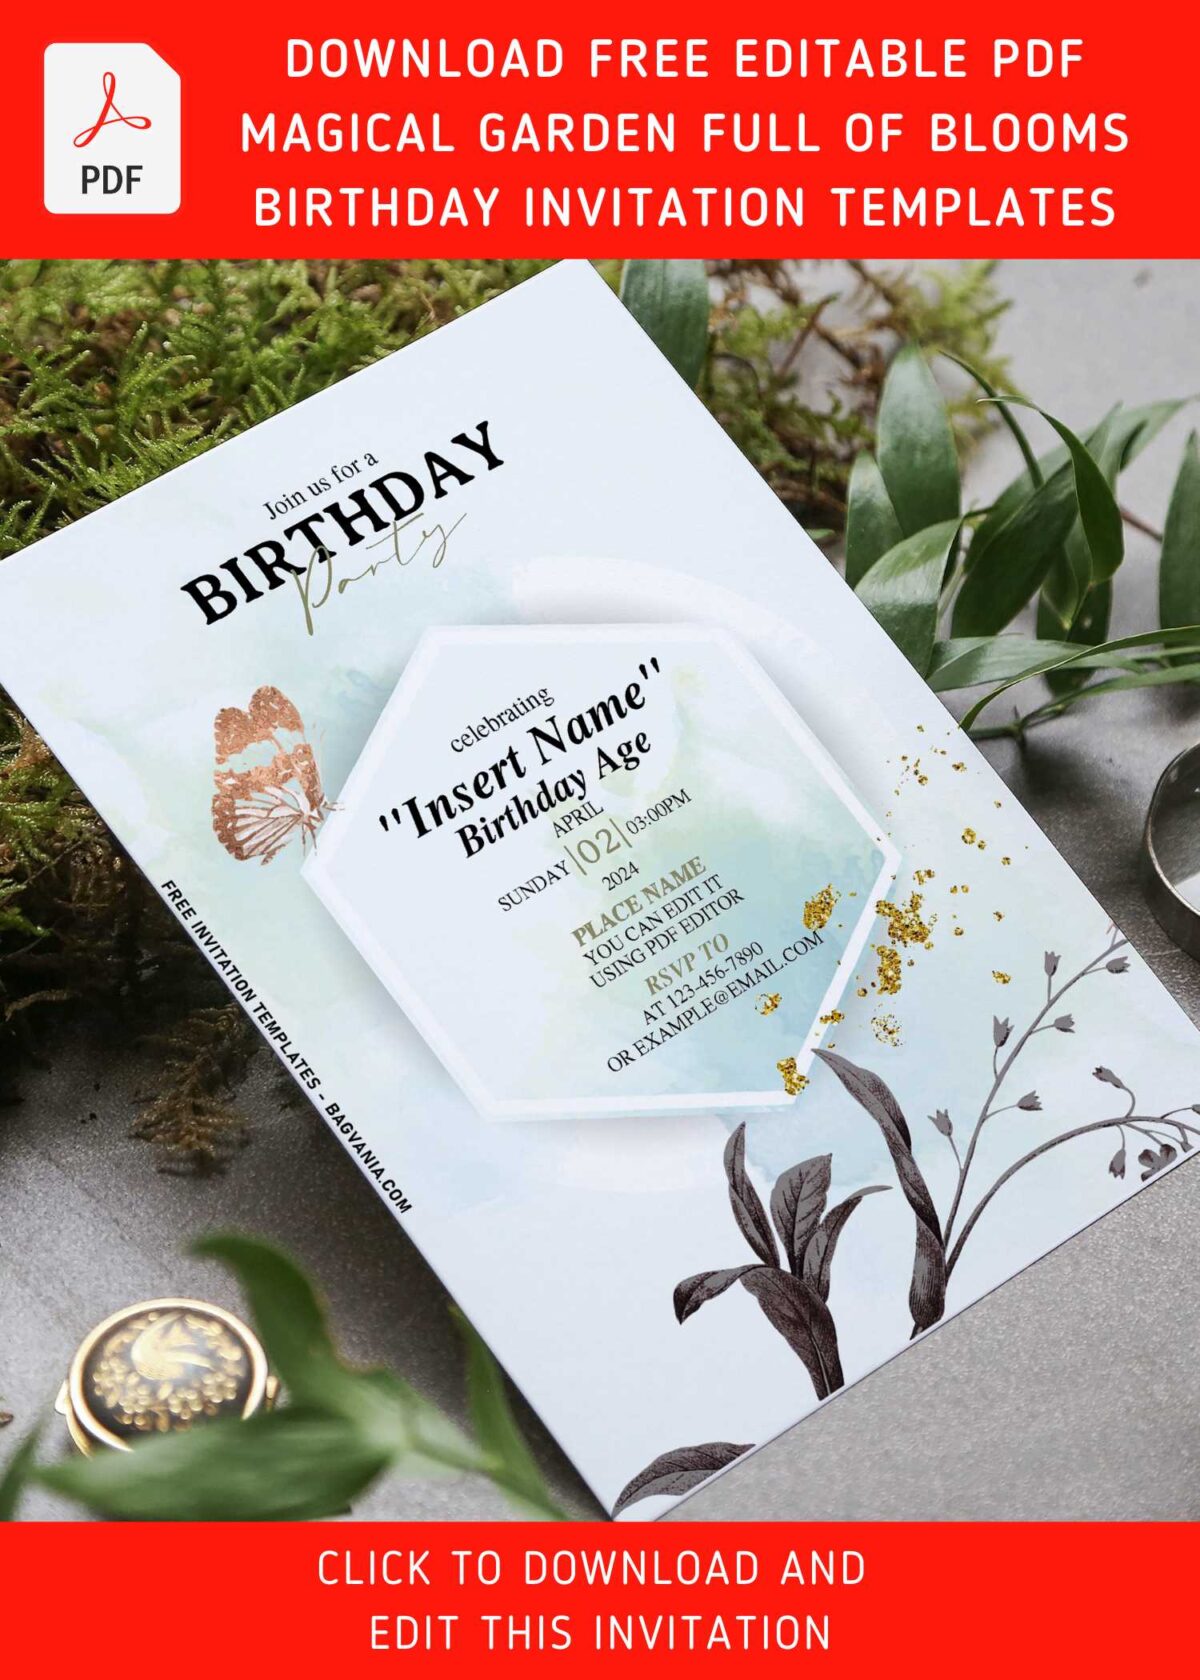 (Free Editable PDF) Magical Garden Full Of Blooms Birthday Invitation Templates with gorgeous arrowhead